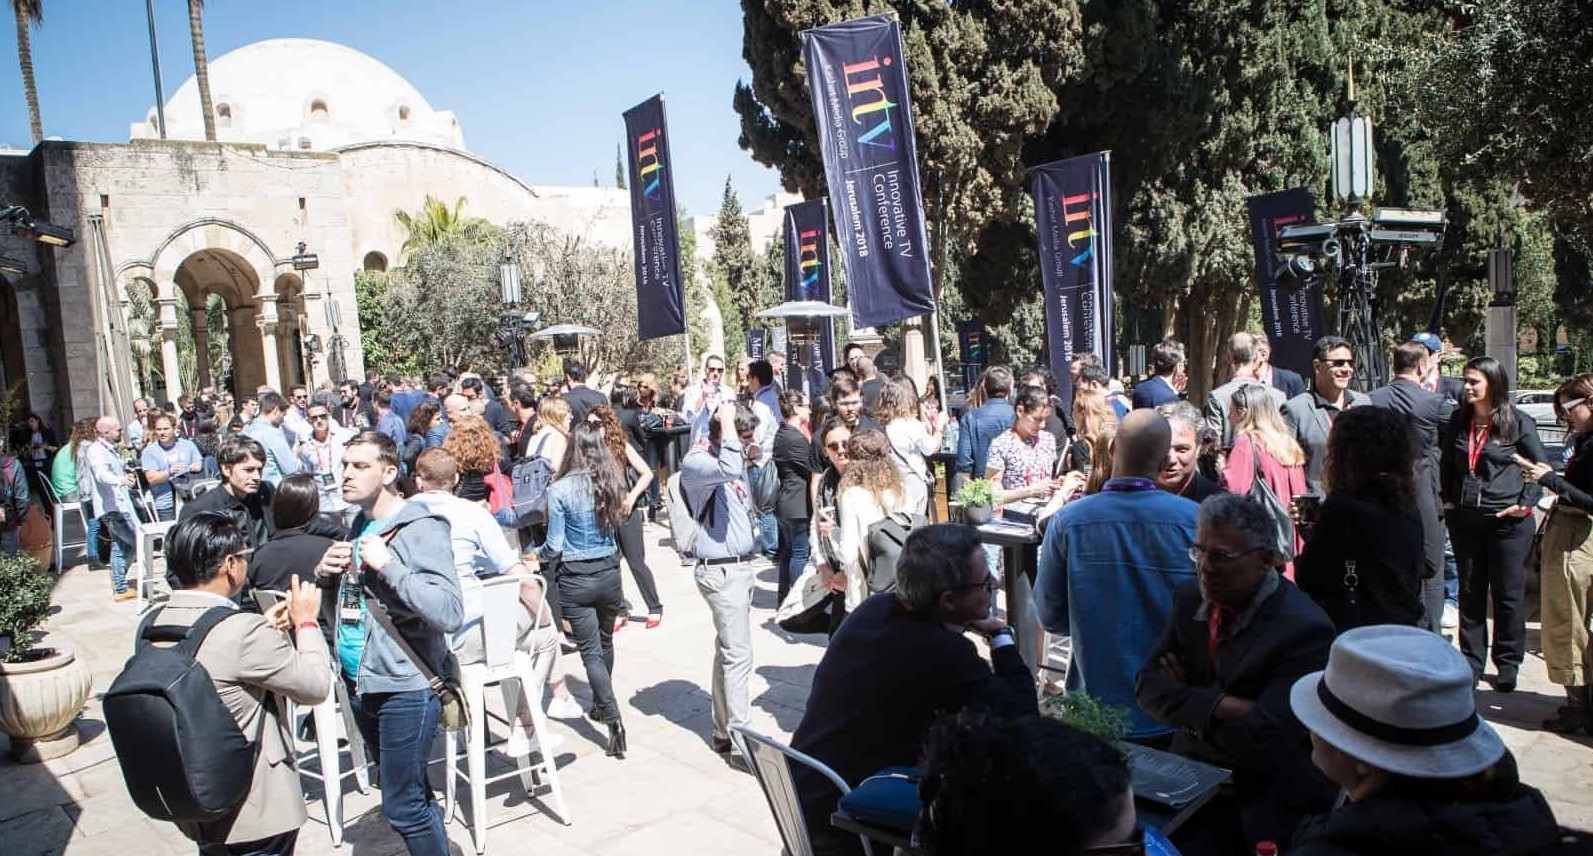 TV executives gather in Jerusalem for the sixth annual INTV Conference. Photo courtesy of Keshet Media Group